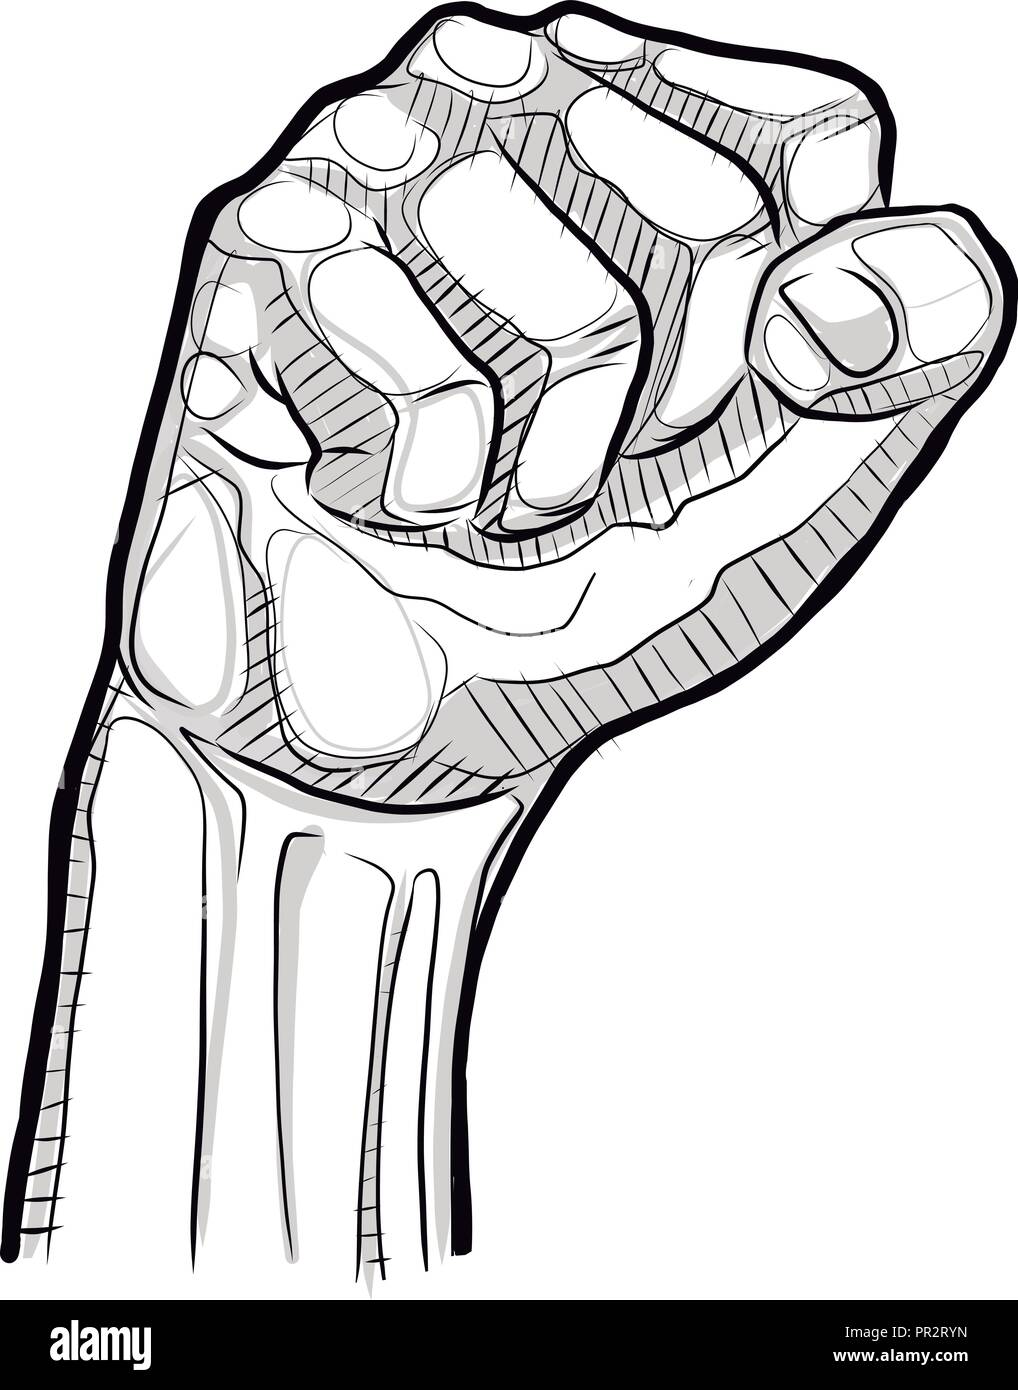 Hand drawn vector digital ink illustration or drawing of a human fist Stock Vector